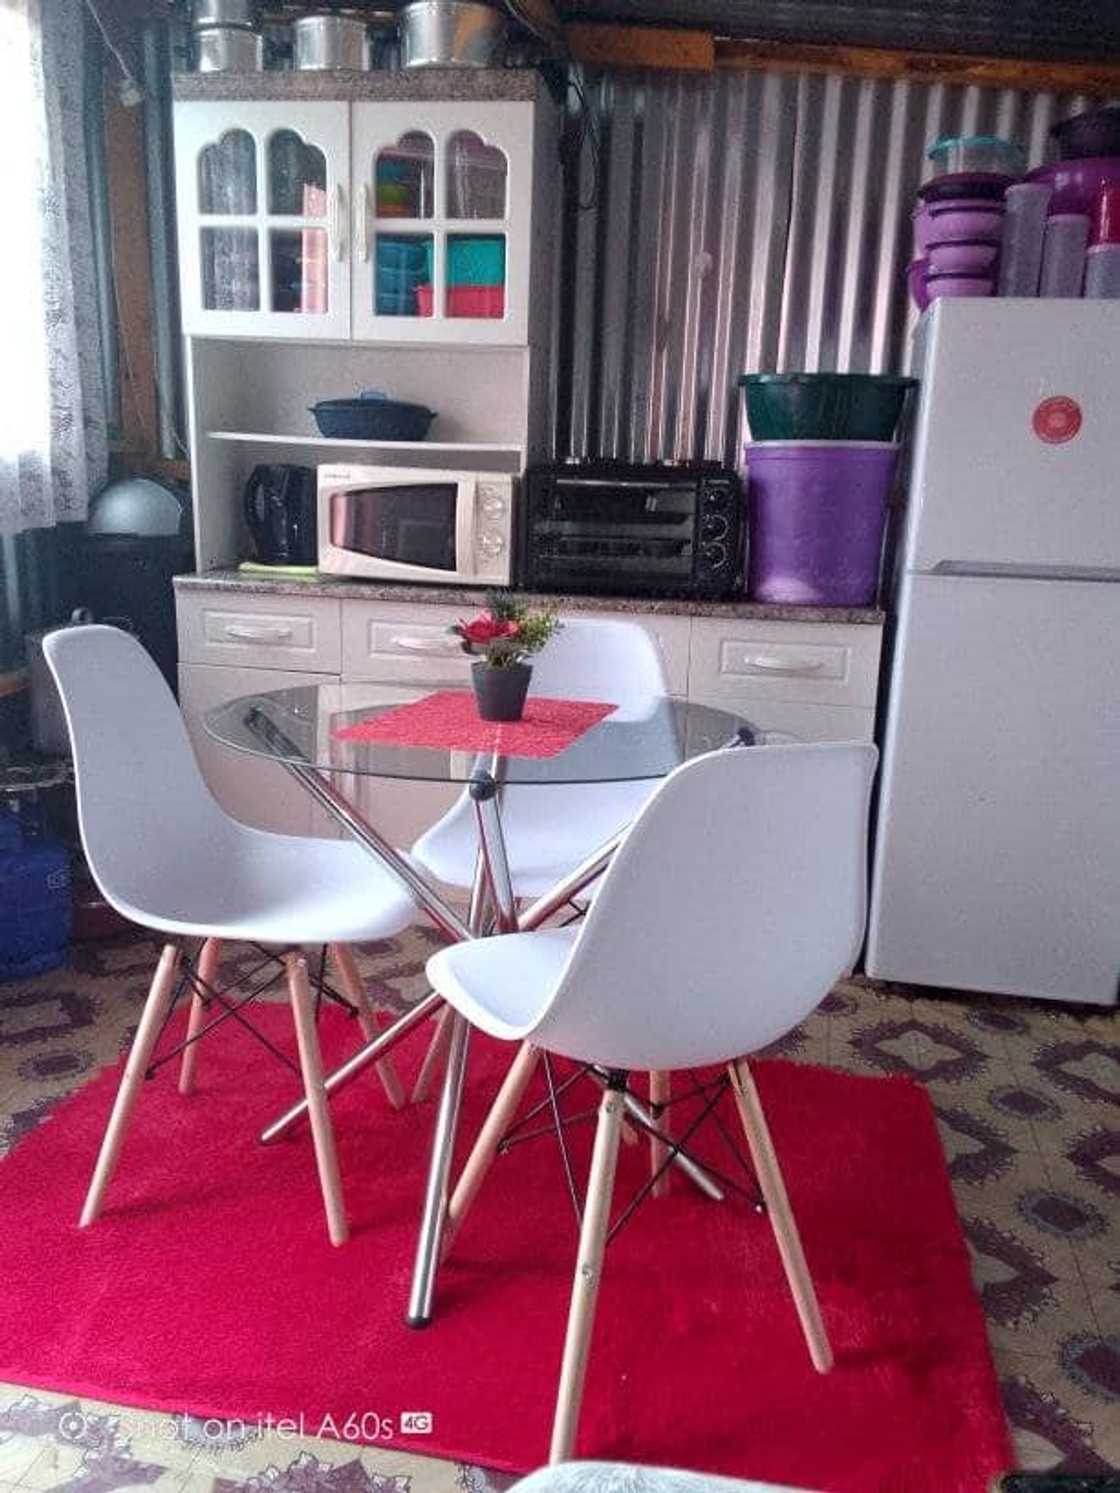 The woman showed off her kitchen furniture.